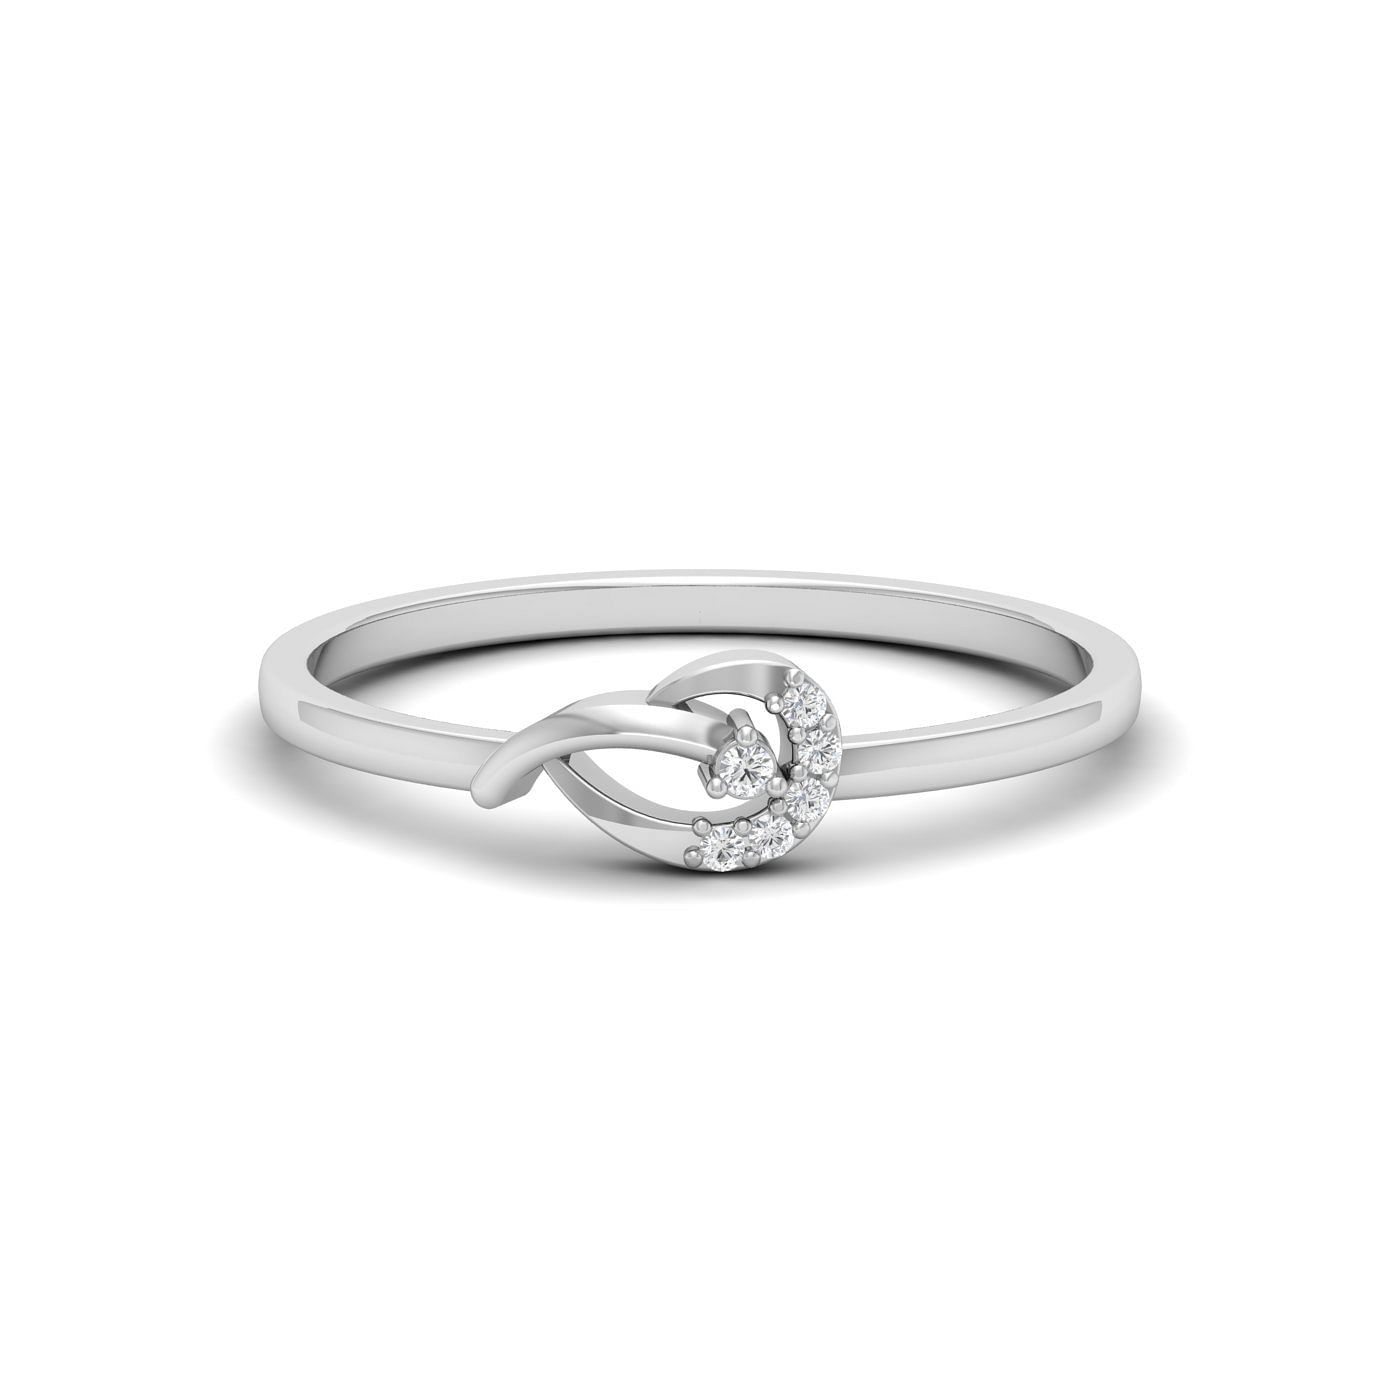 Light weight Roni Diamond Delicate Ring white gold for women